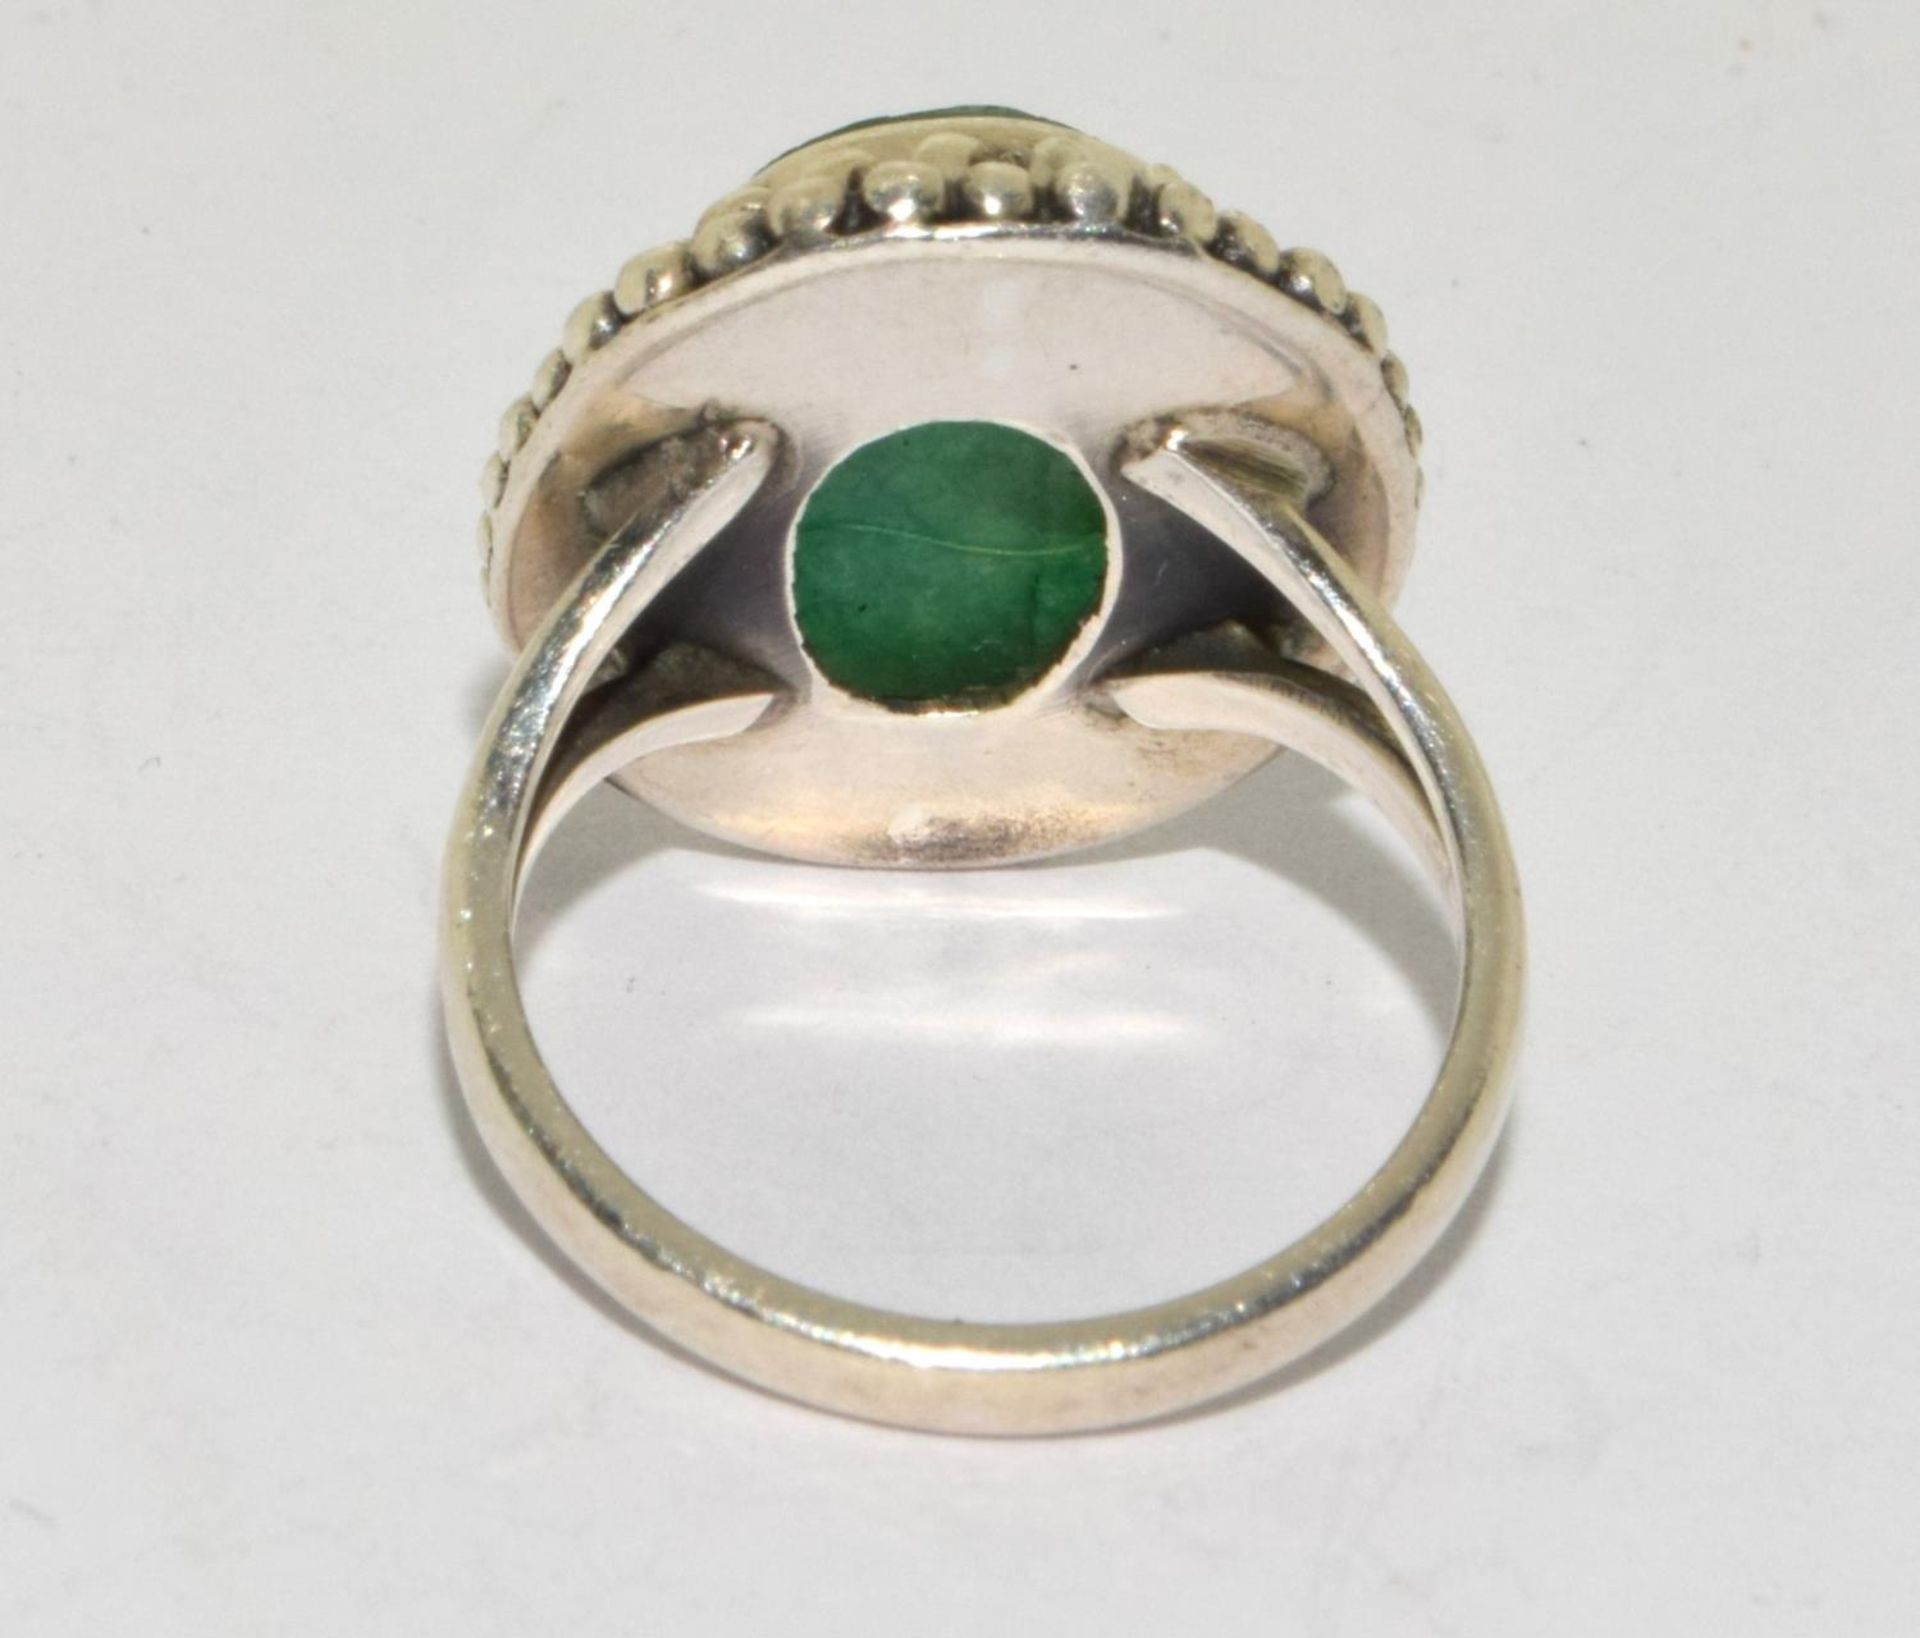 A 925 silver green agate ring size J - Image 3 of 3